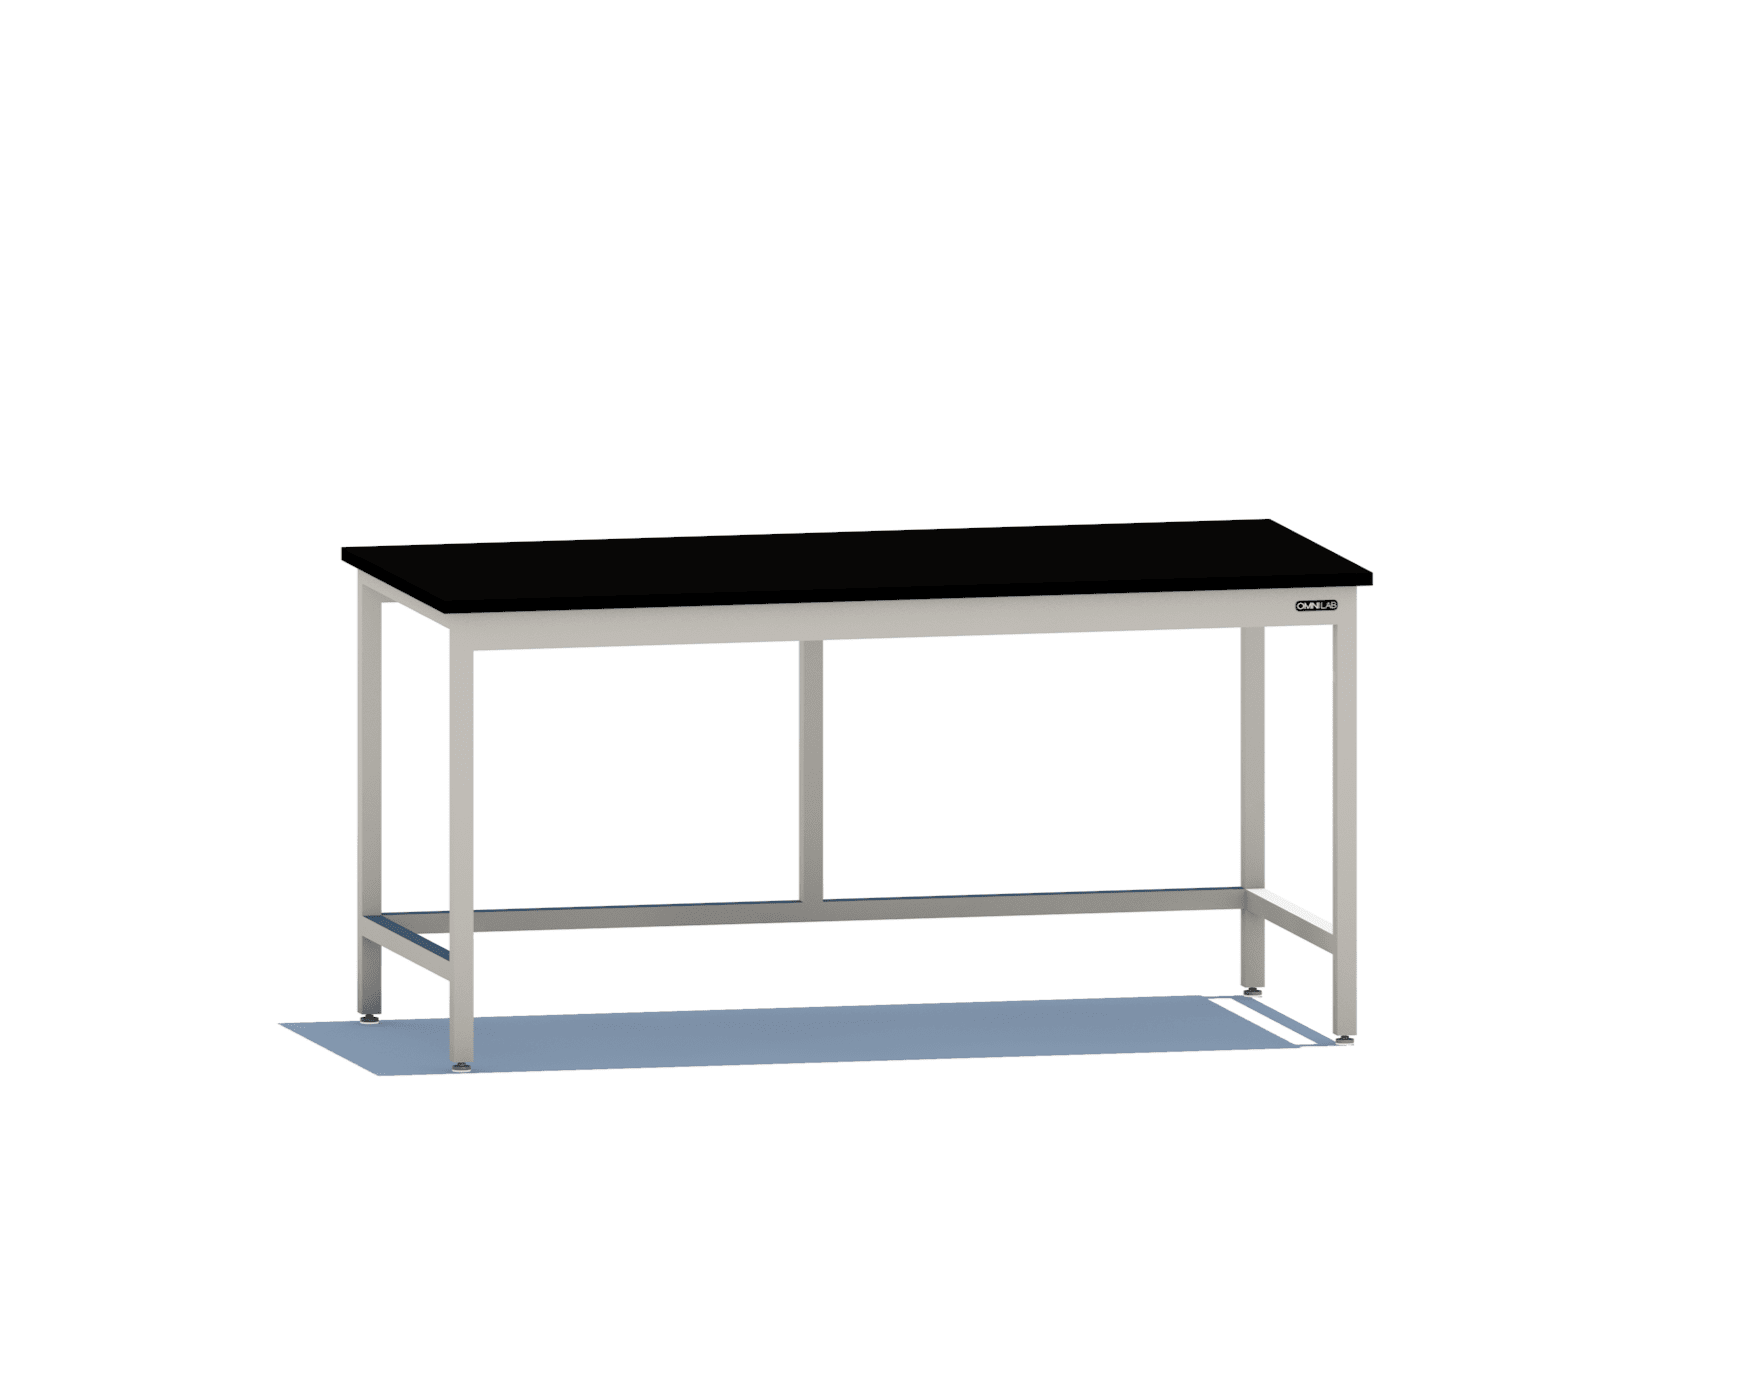 Essential Table 1 Lab Tables OMNI Lab Solutions 72" wide 